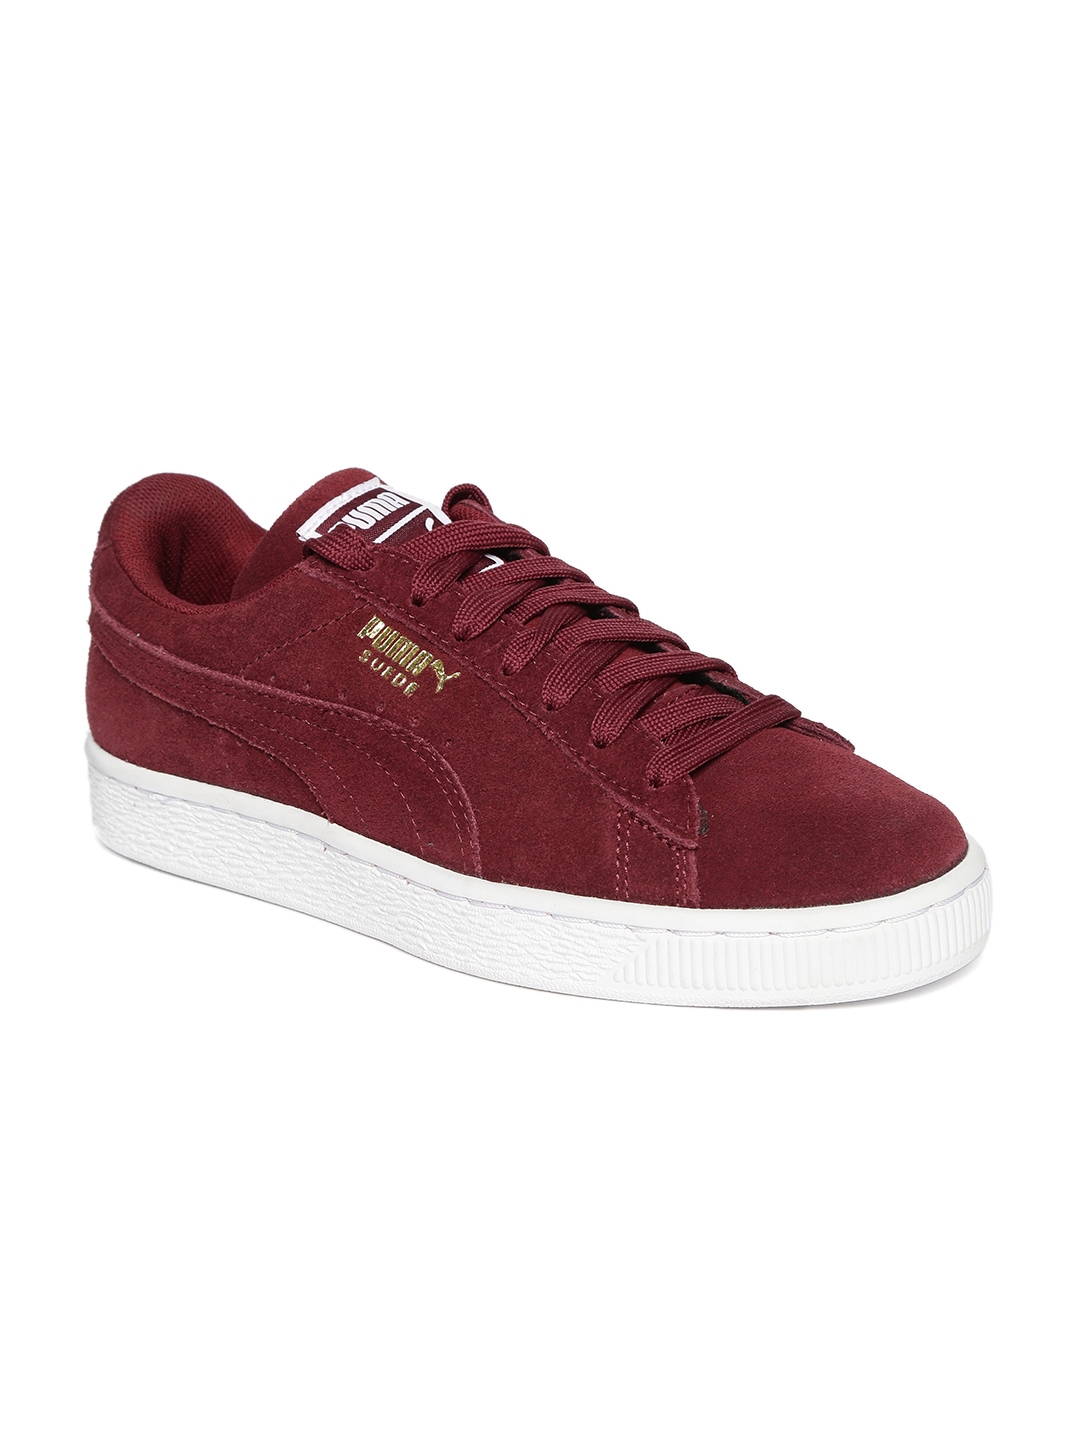 Buy Puma Men Maroon Classic + Suede Sneakers - Casual Shoes for Men ...